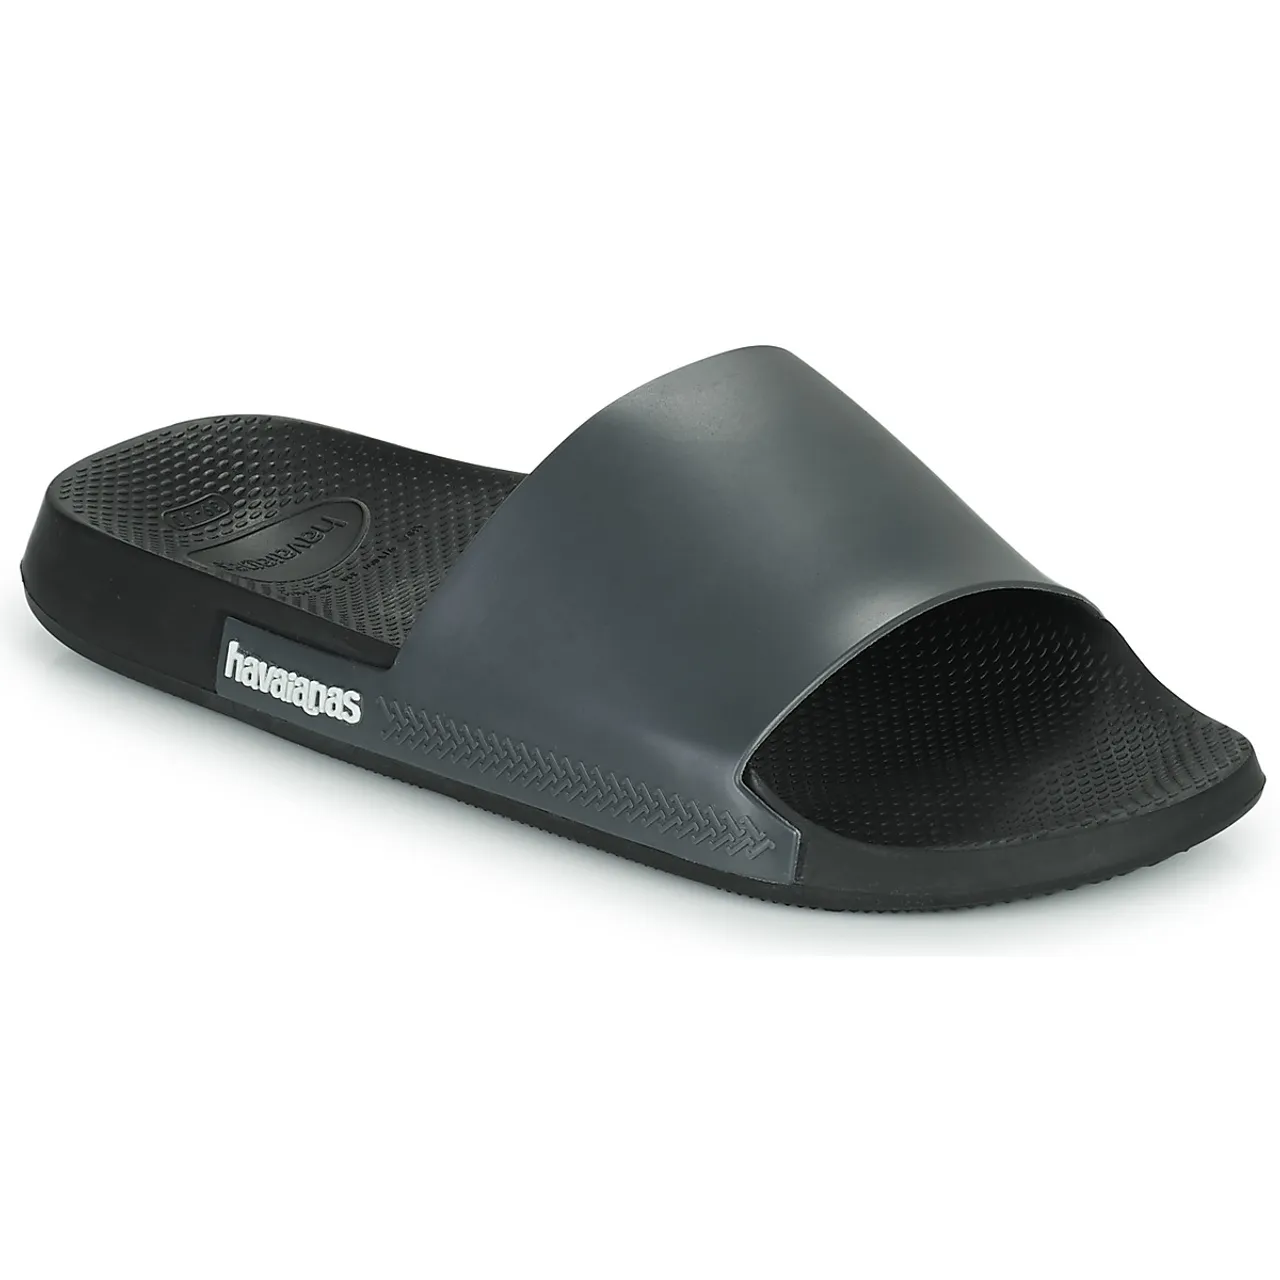 Havaianas  SLIDE CLASSIC  women's Mules / Casual Shoes in Black